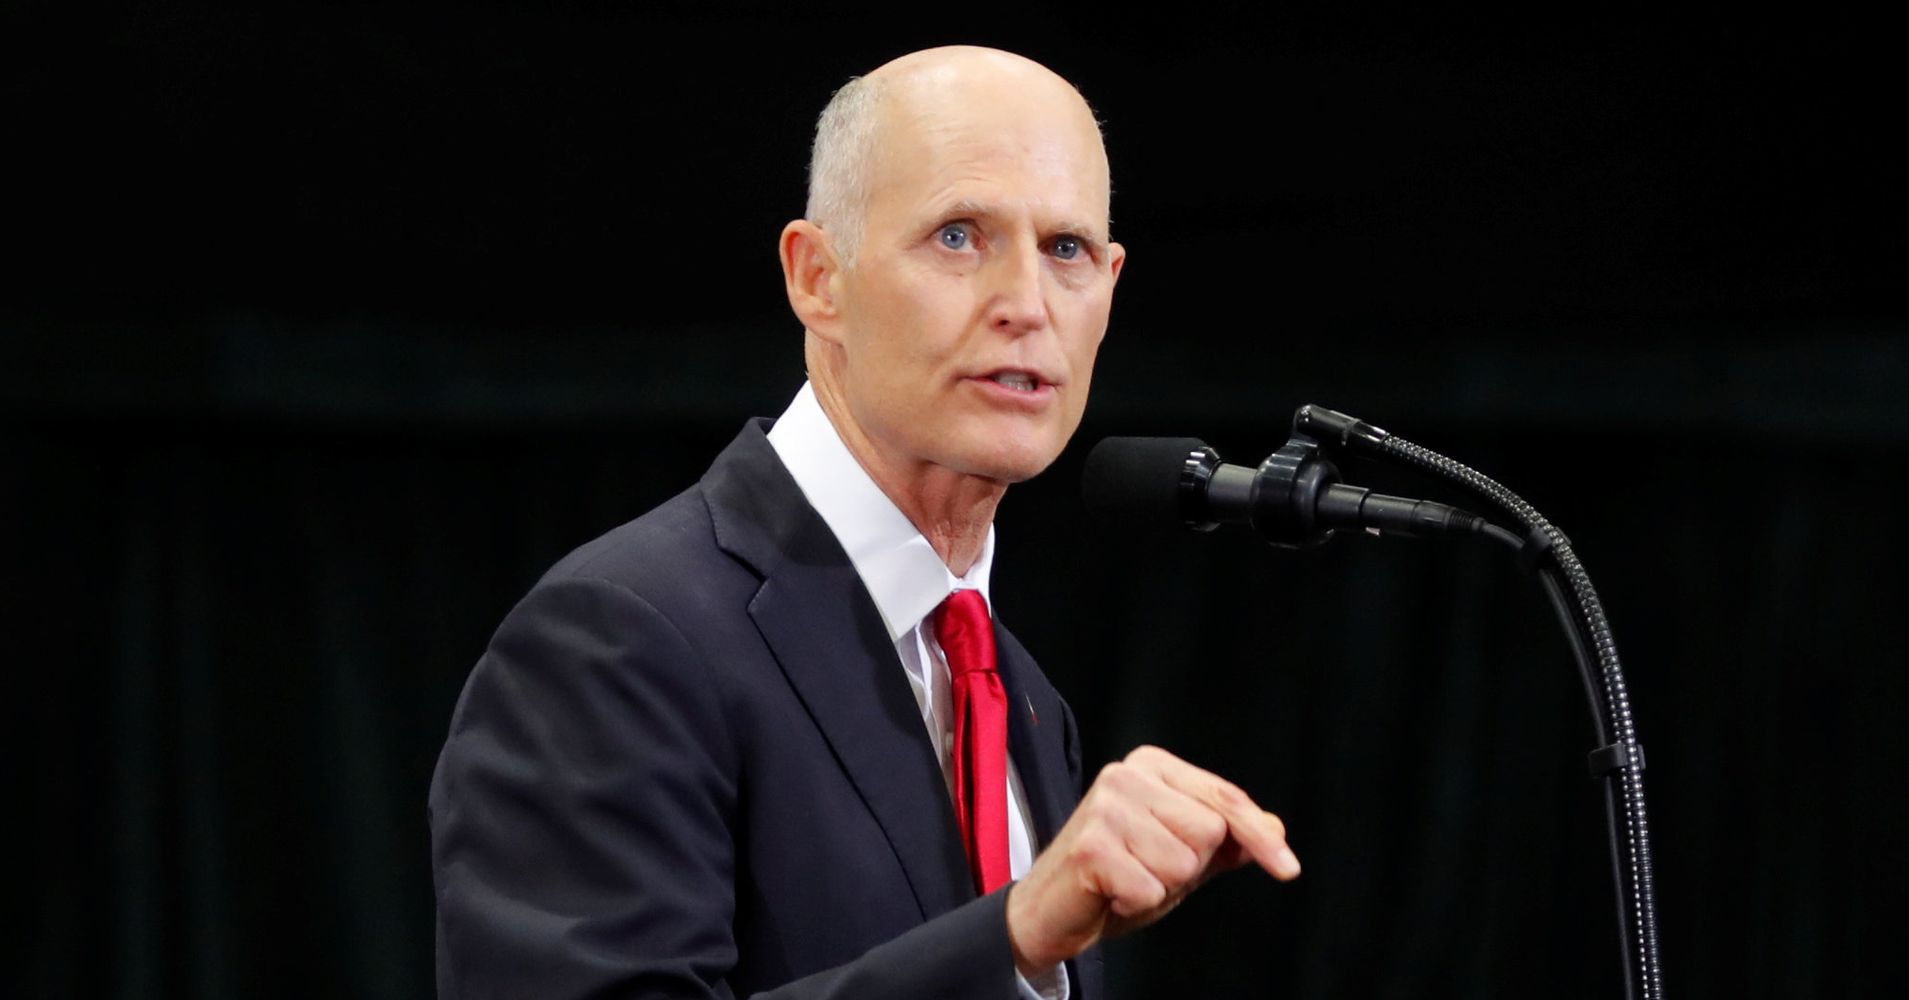 Florida Senate Race Goes To A Recount After Early Calls For Rick Scott ...